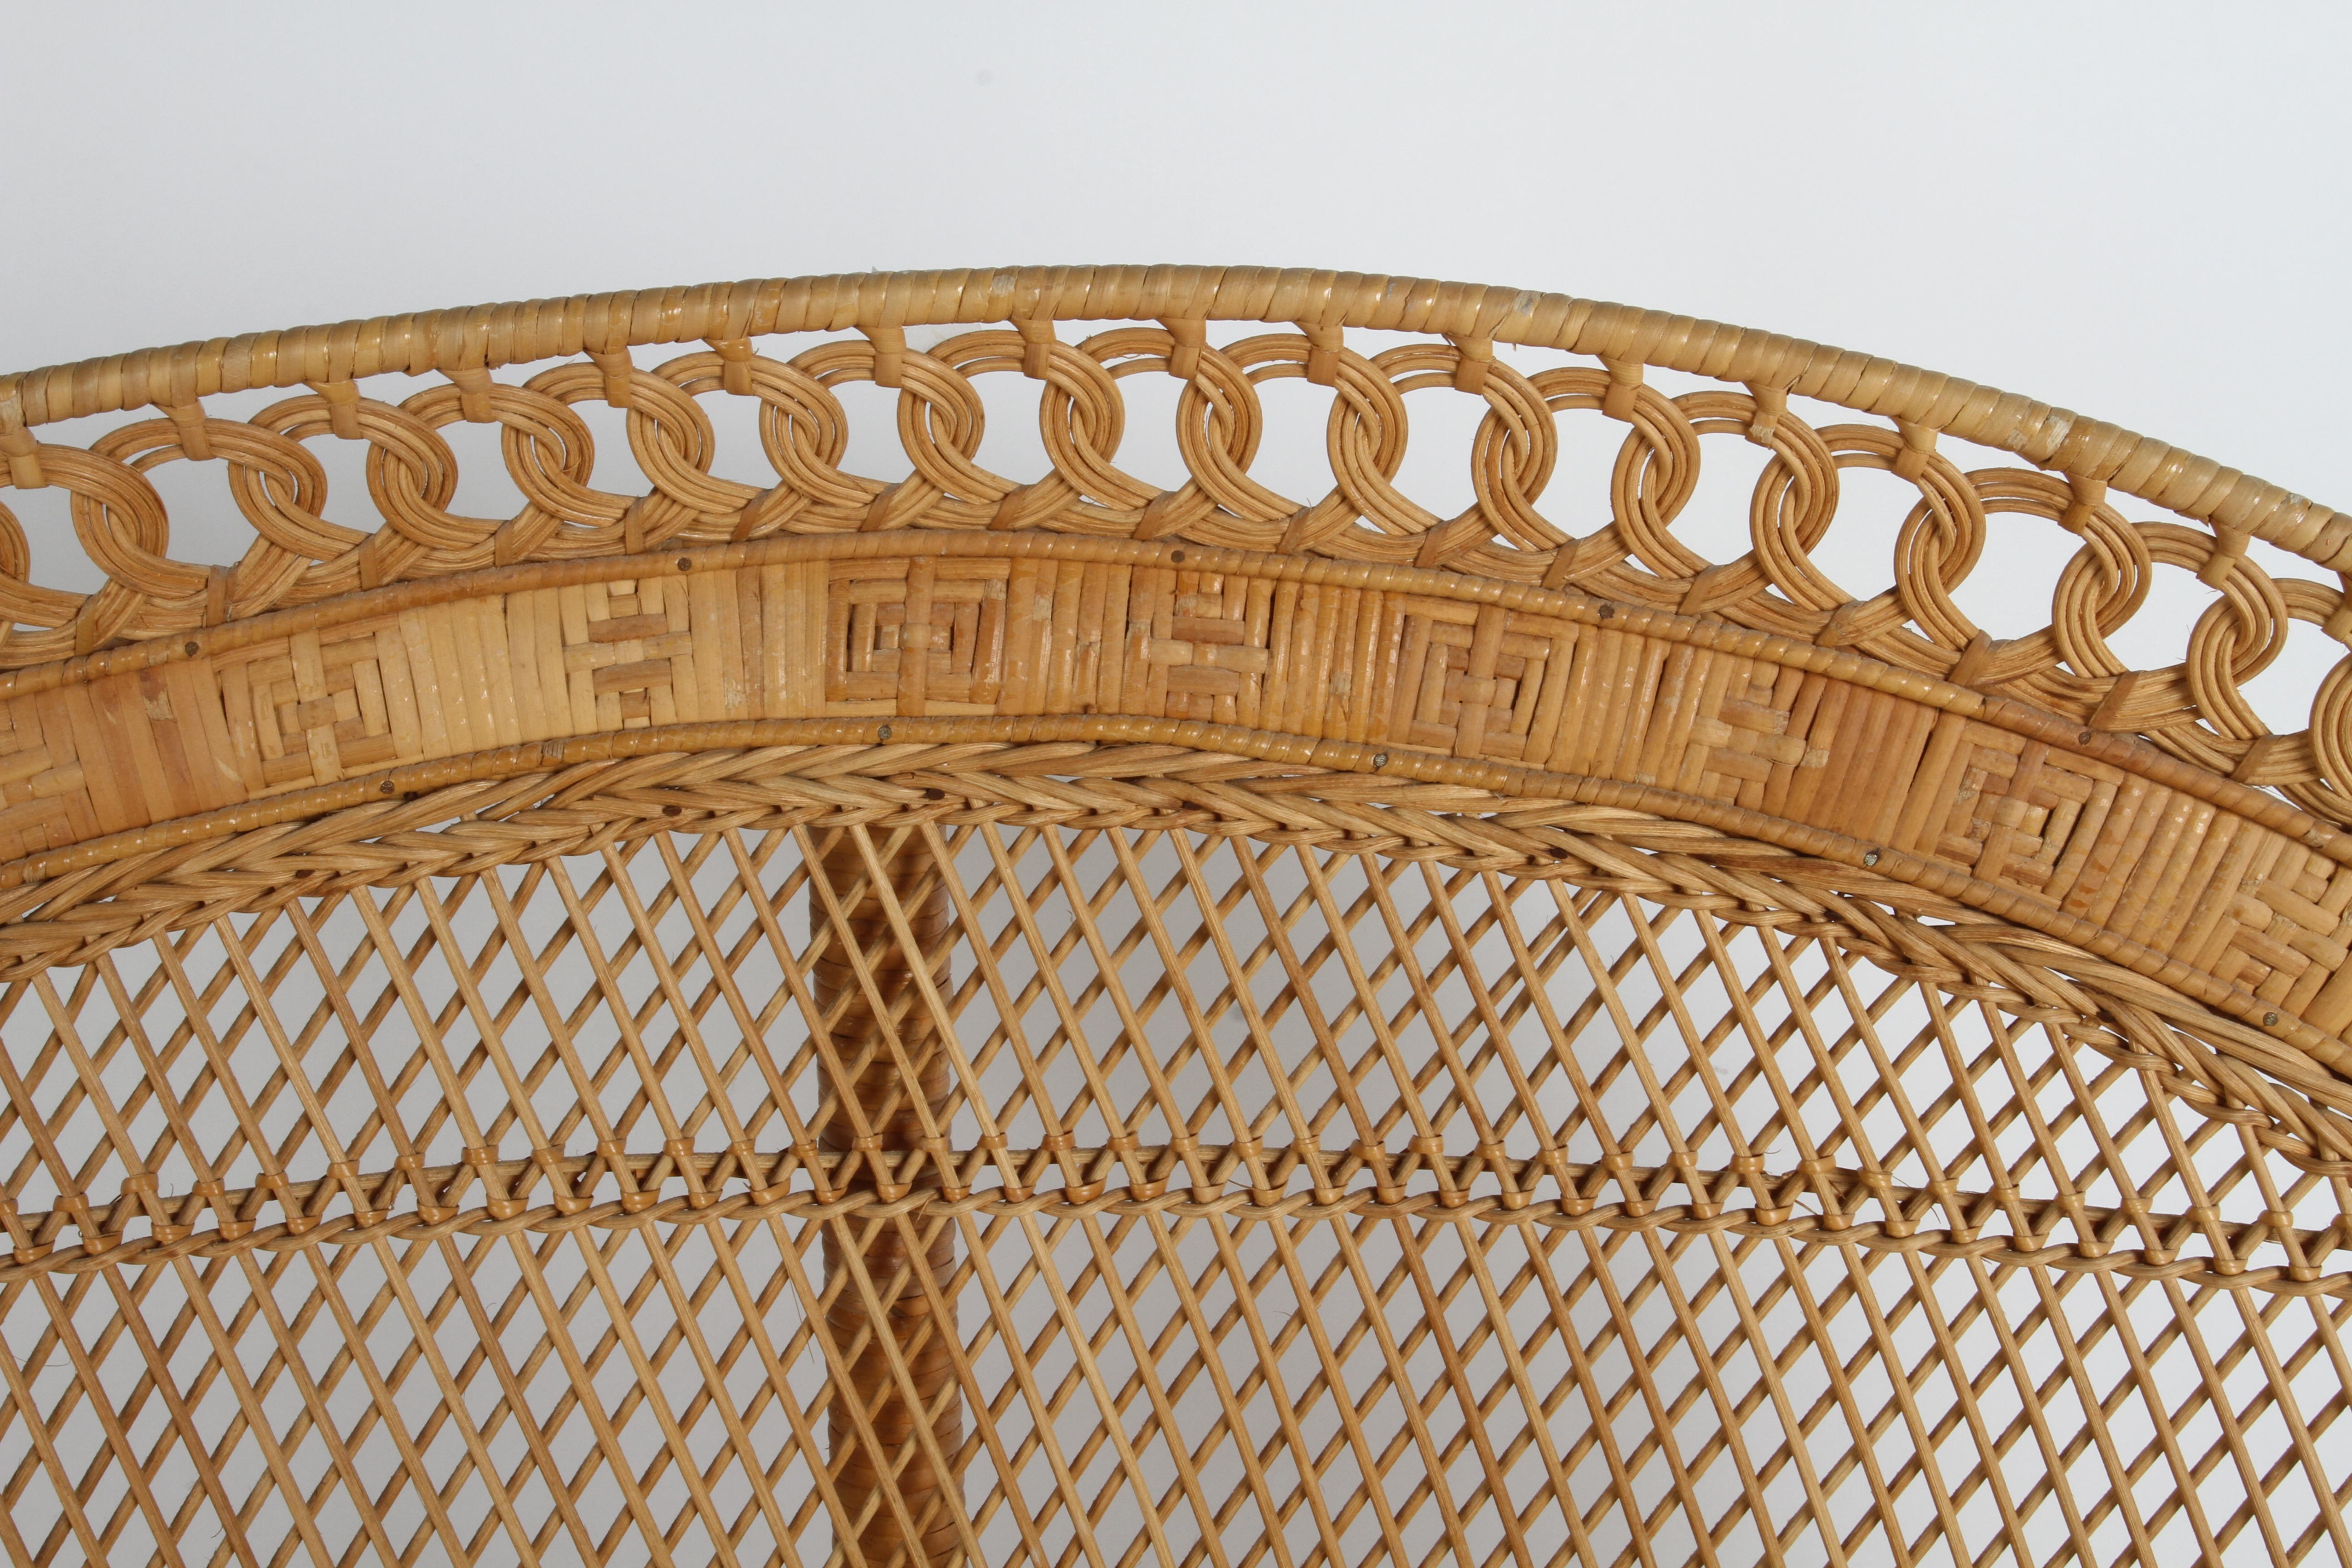 Vintage 1970s Rattan & Wicker Handcrafted Boho Chic Emmanuelle Peacock Chair For Sale 8